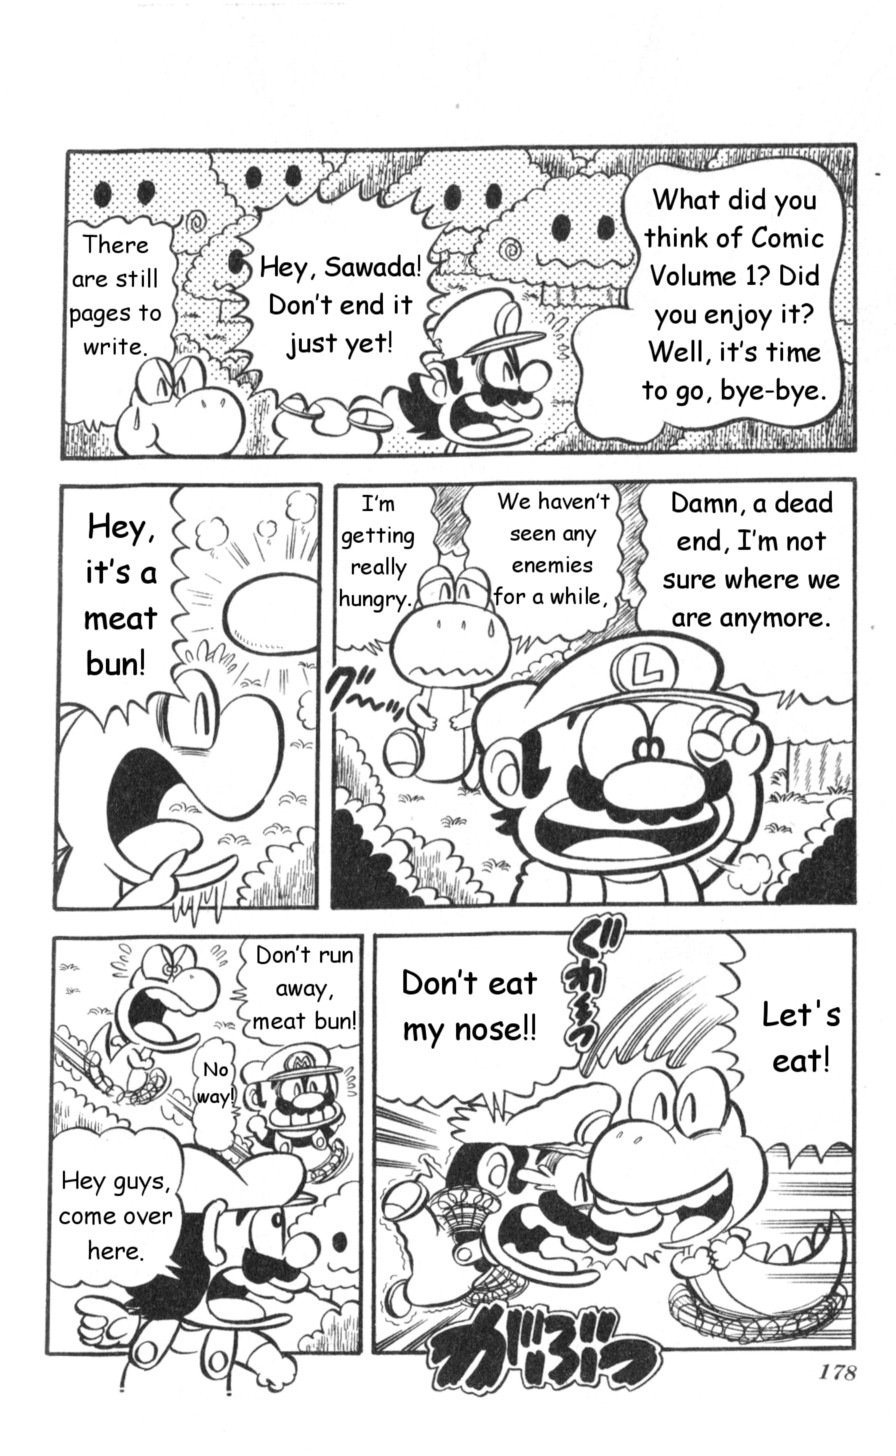 Super Mario-Kun Vol.1 Chapter 15: What Will Happen!? Mario 5 Appears!? - Picture 2